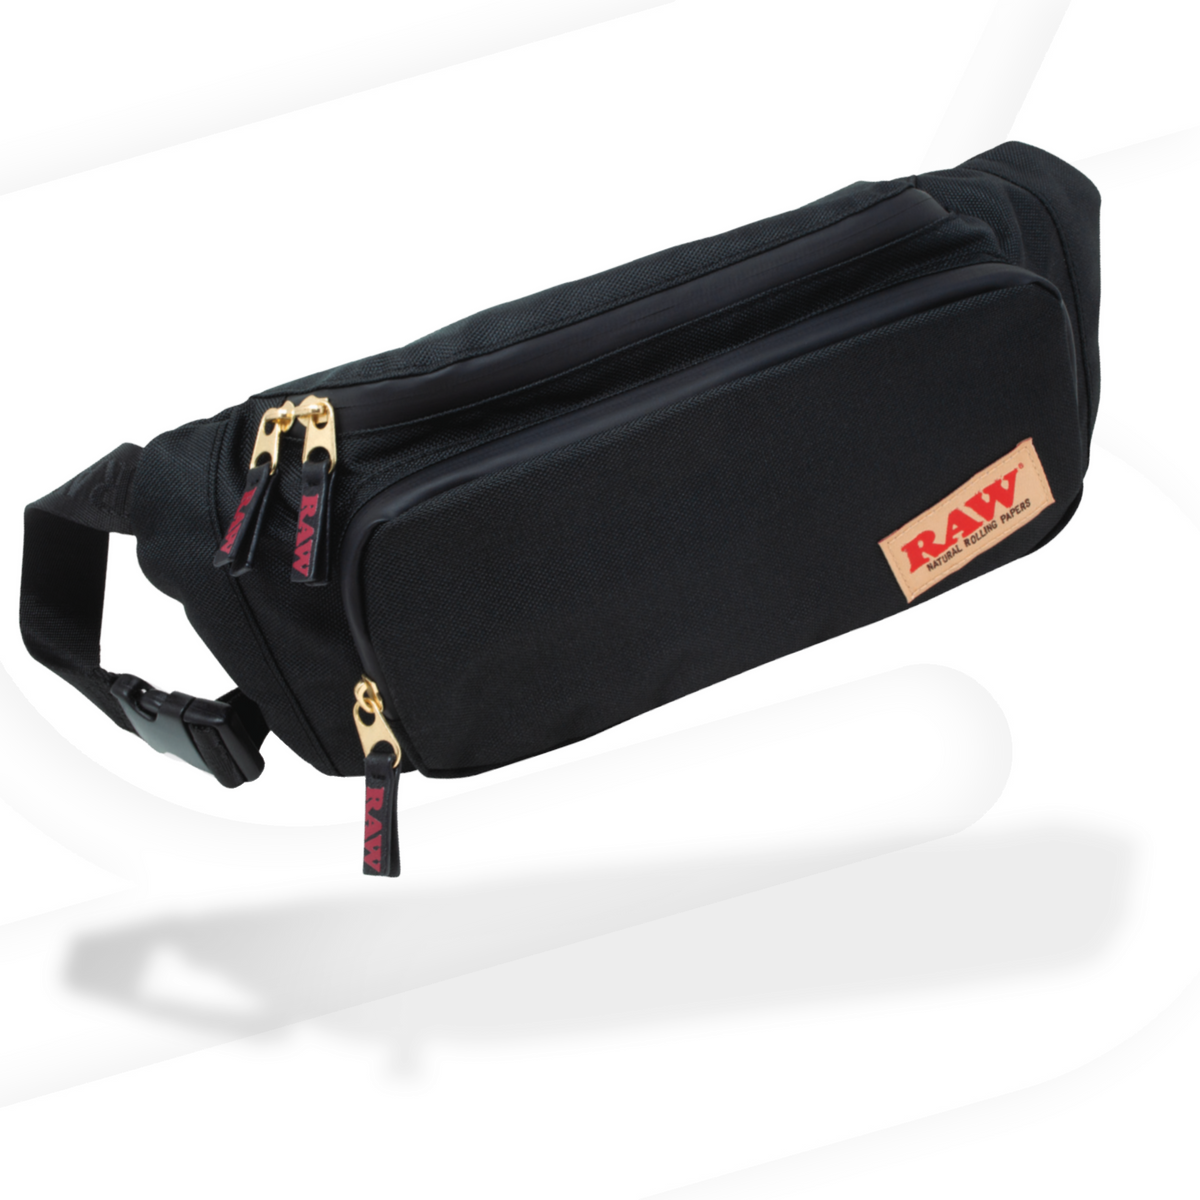 RAW x Rolling Papers Sling Bag Storage WAR00166-MUSA01 esd-official